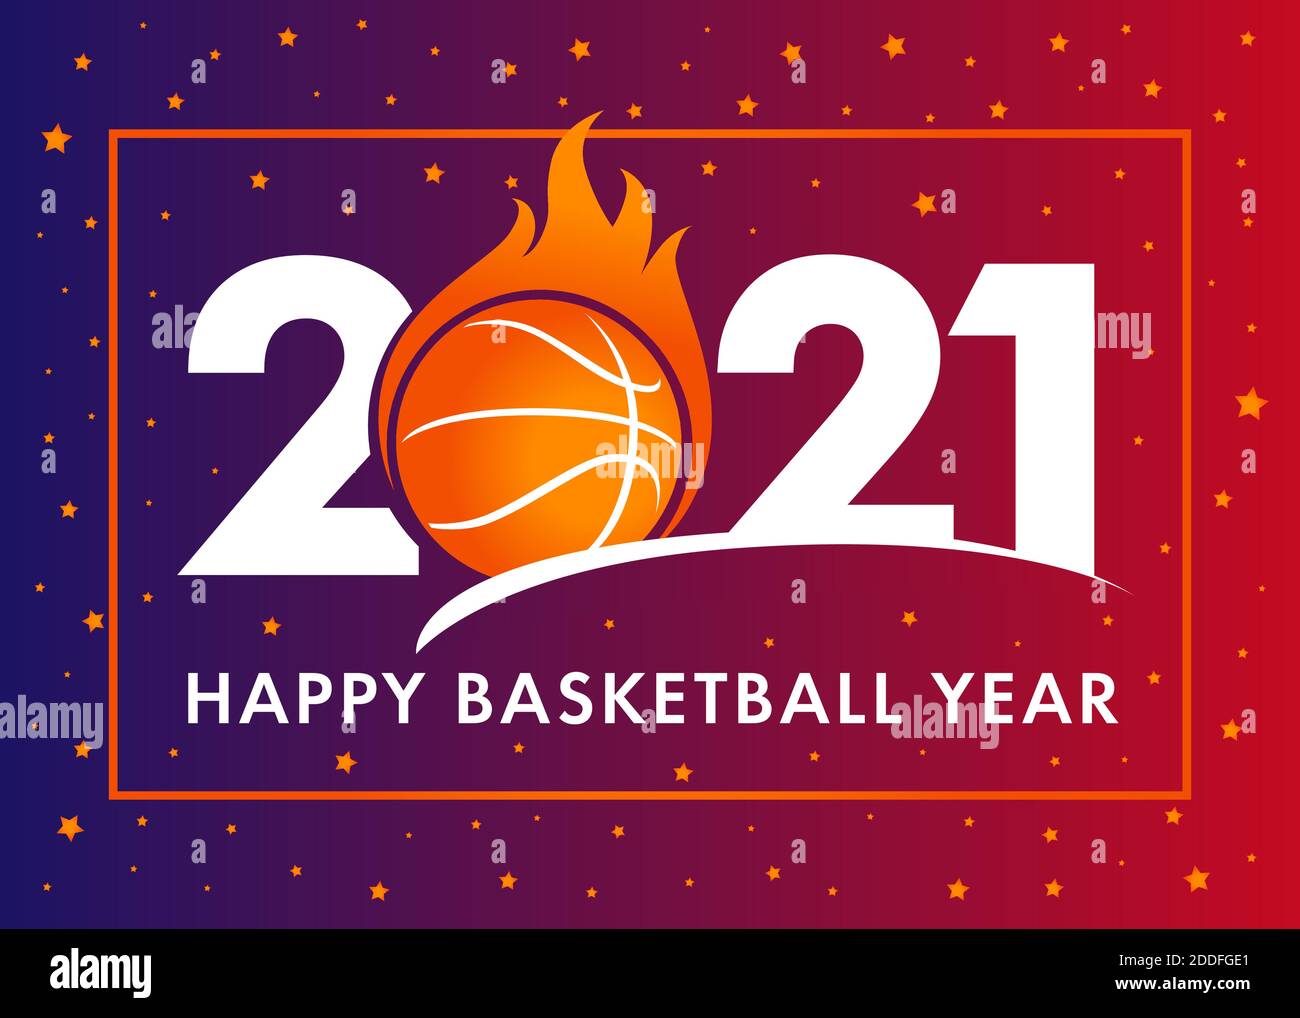 Happy Basketball Year 2021 with text and ball in fire on orange background. Merry Christmas vector illustration with 2, ball & 21 numbers, invitation Stock Vector